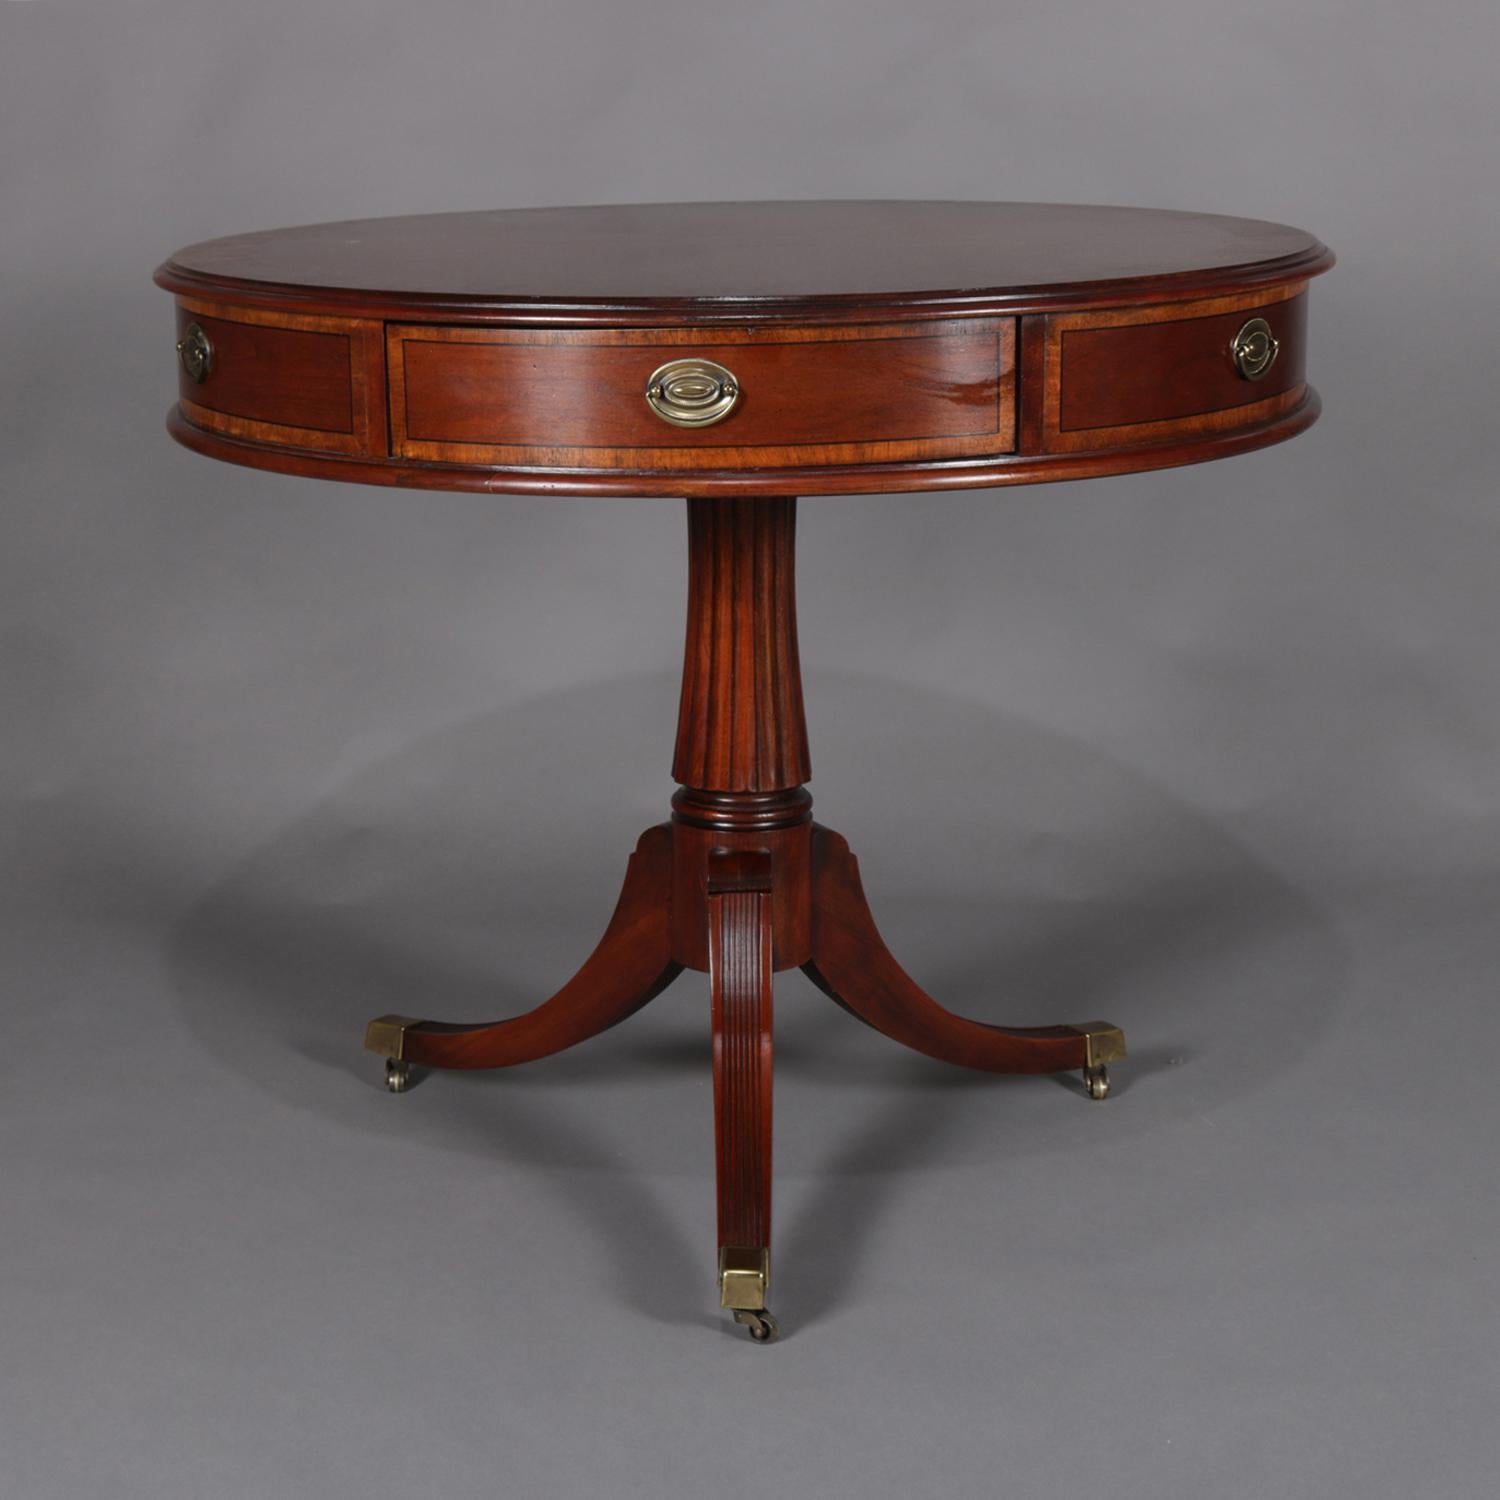 American English Regency Style Inlaid Mahogany 6-Drawer Center Table by Lexington